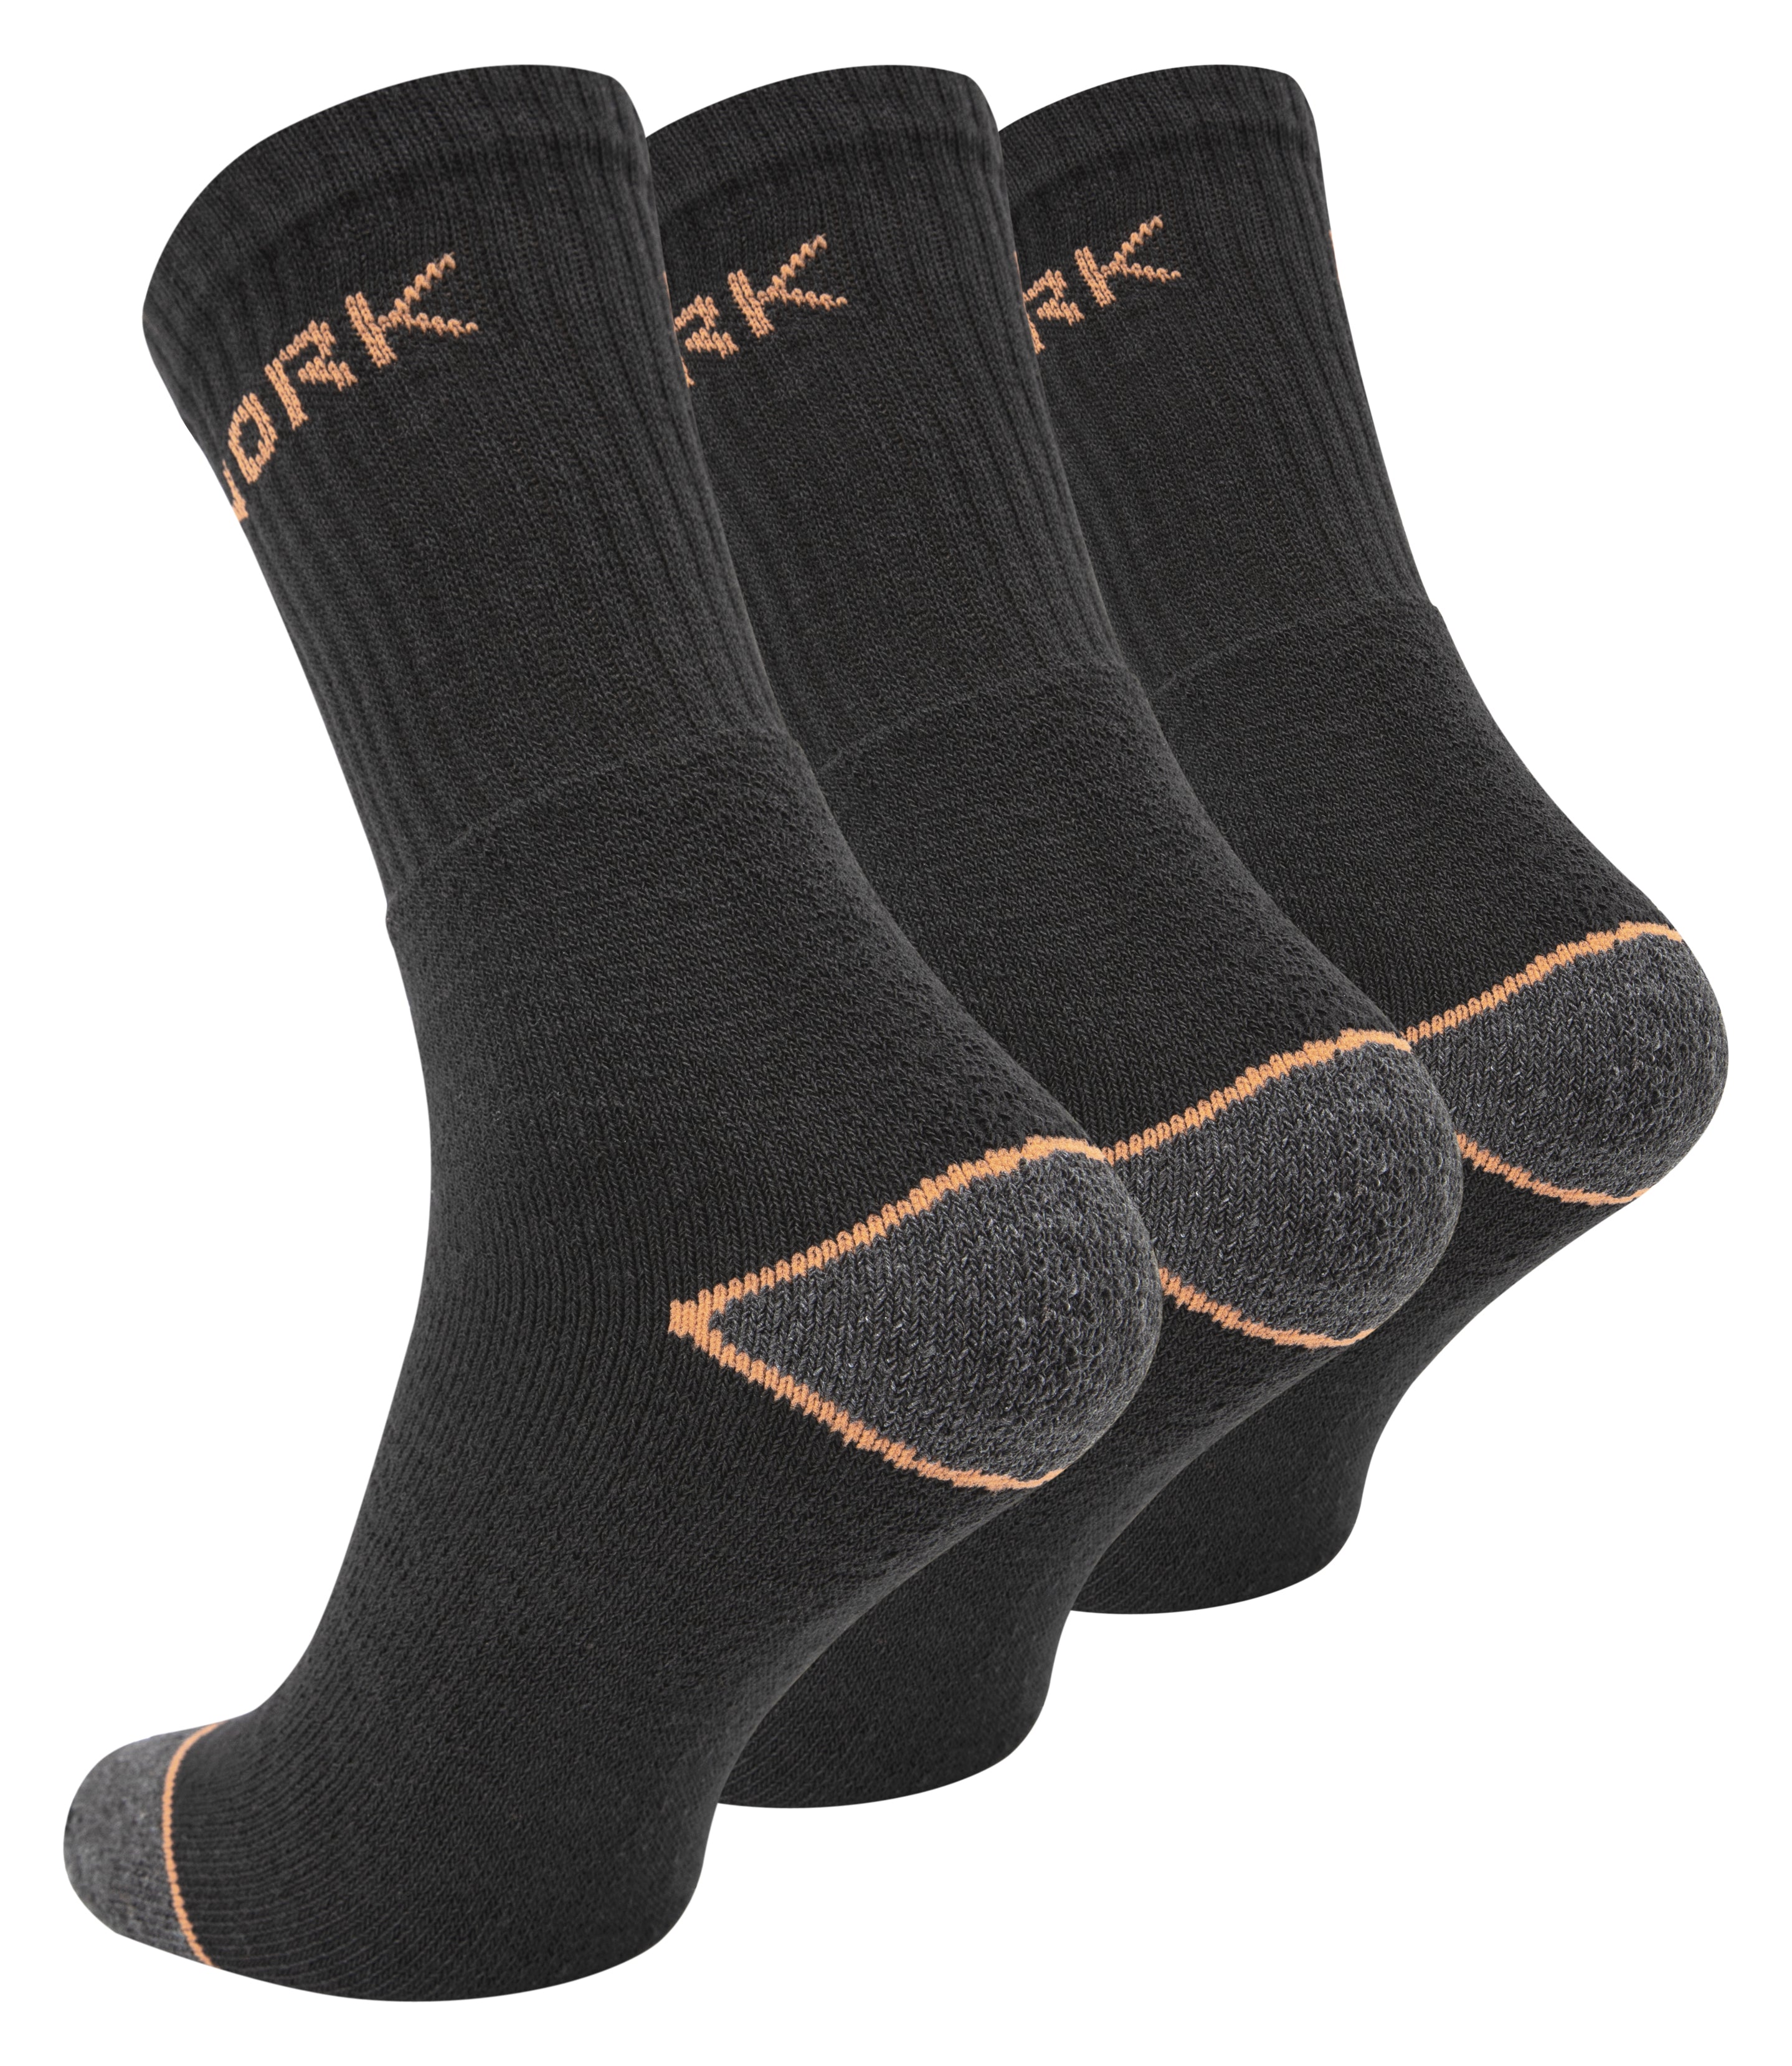 Paolo Renzo® work socks 3/6/12/18 and or Traumpreisfabrik 39/42 36 - sizes 43/46 pairs –